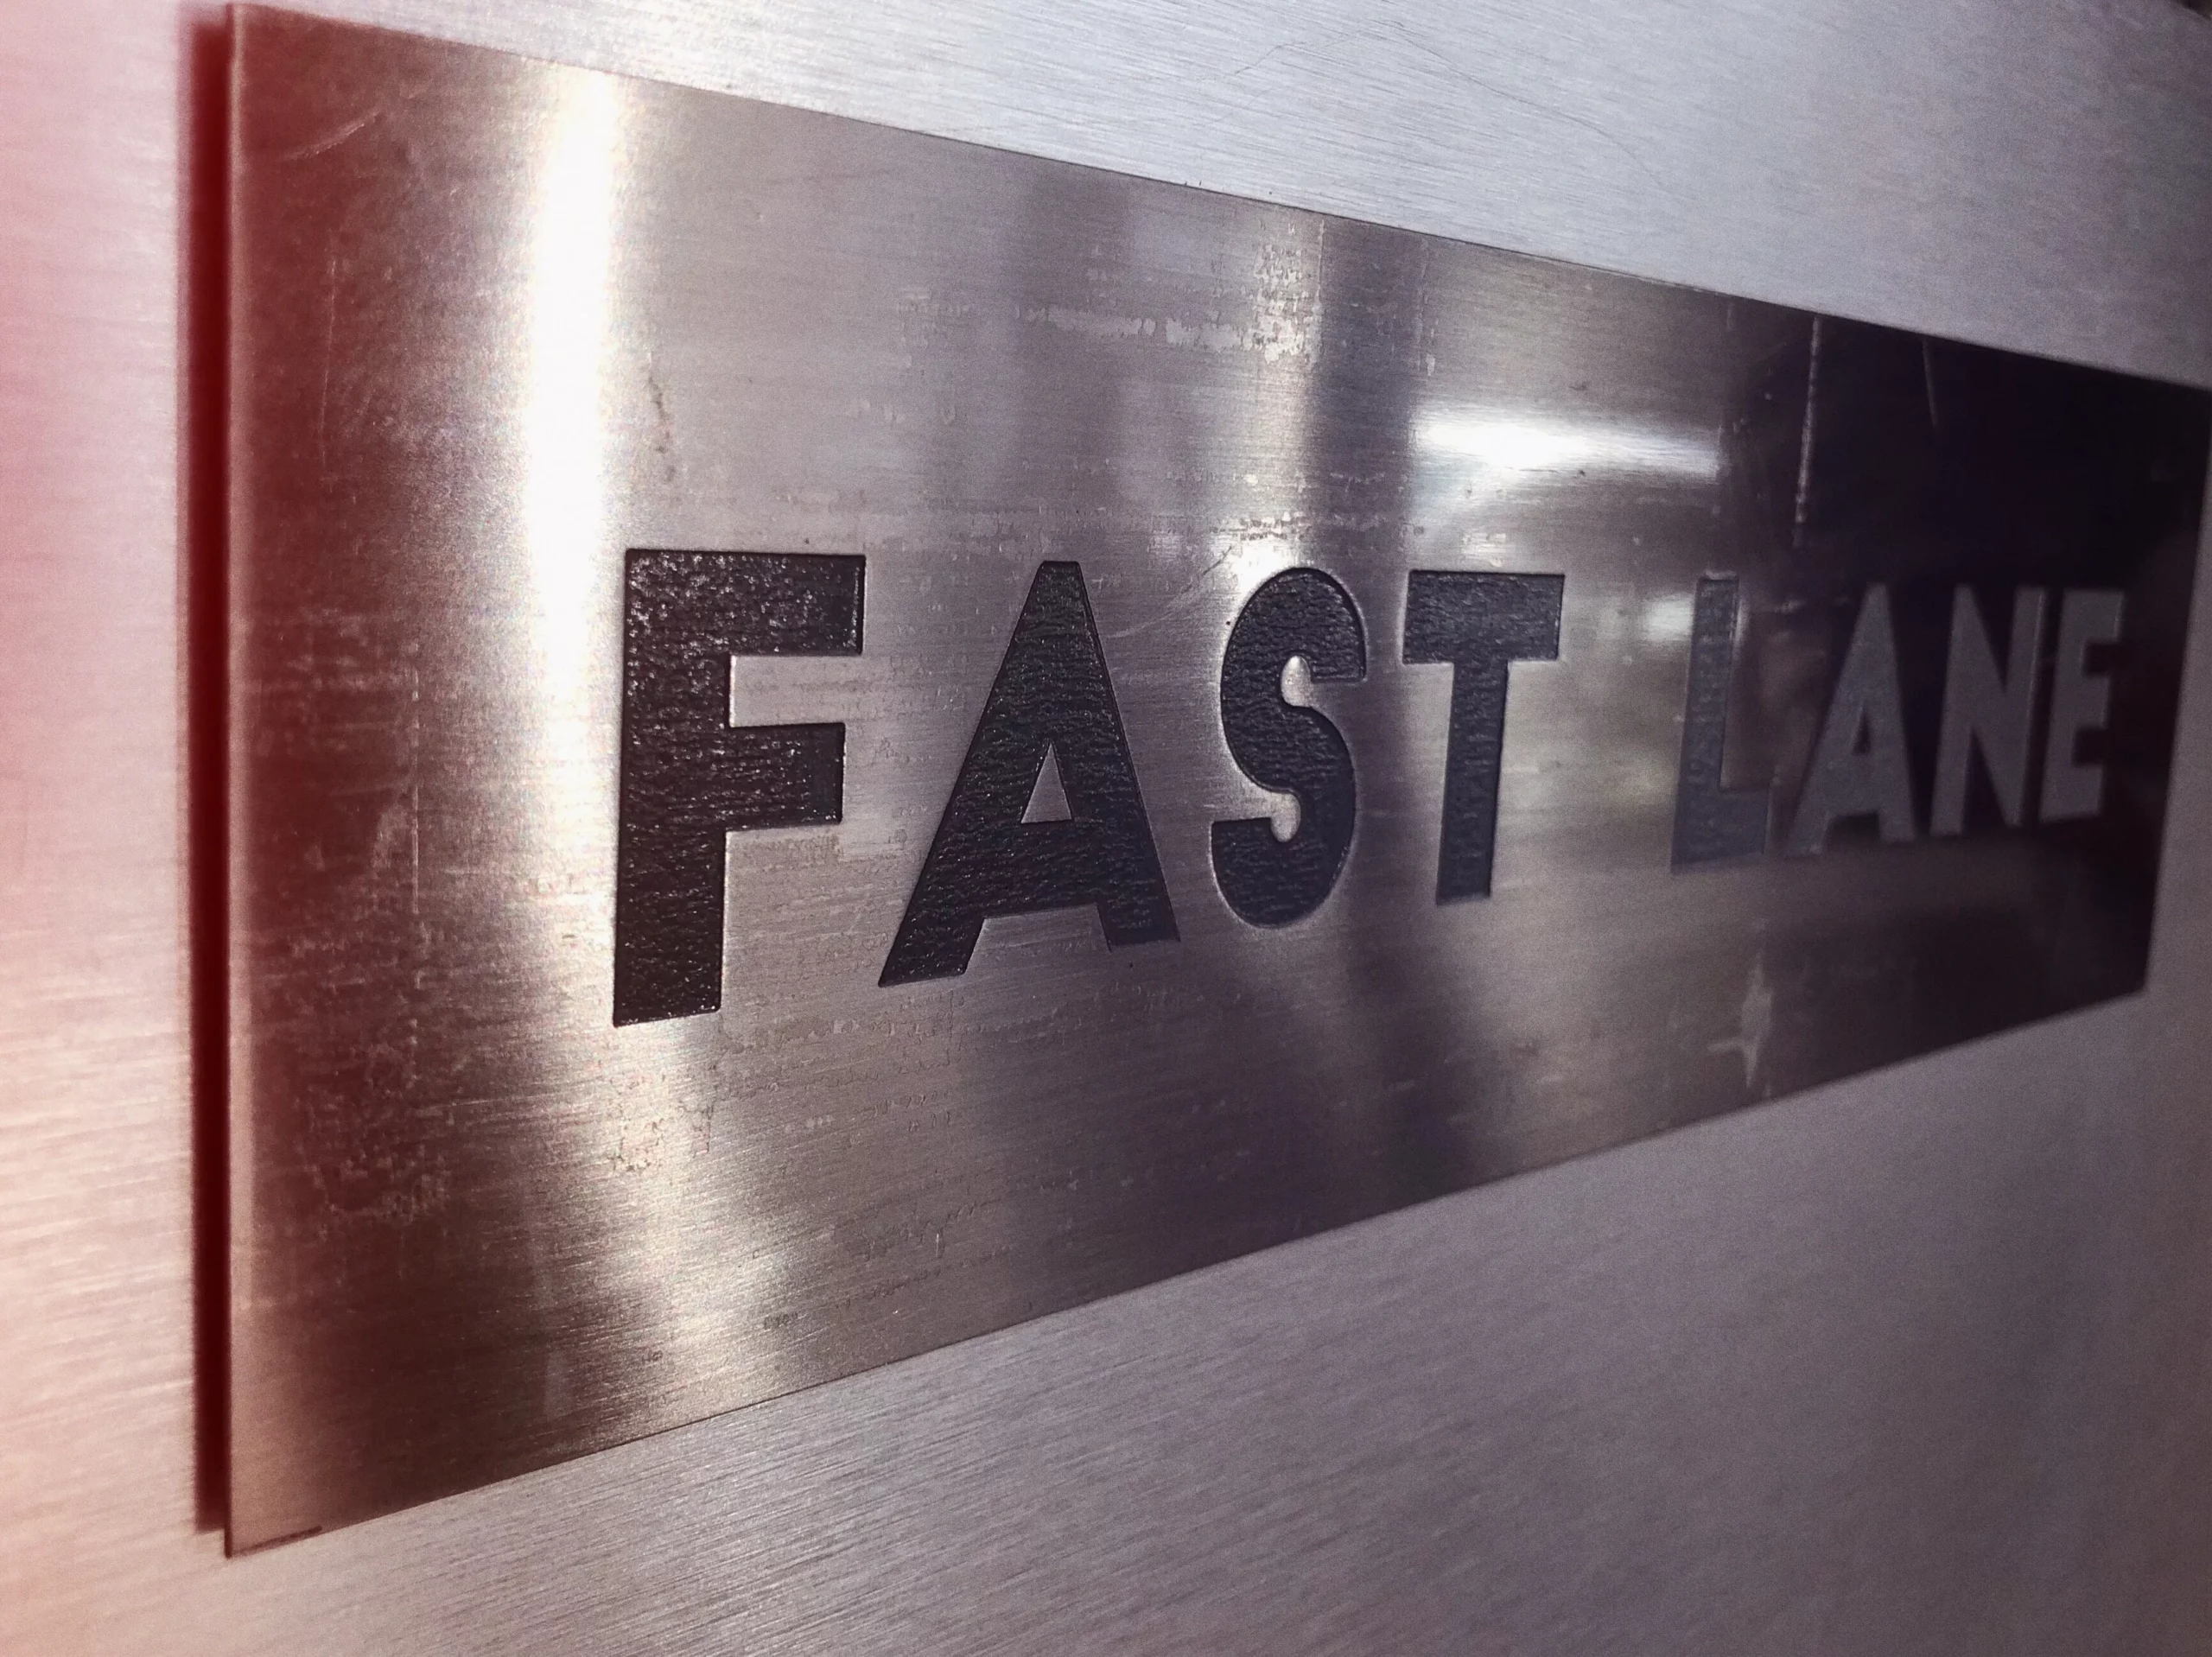 A “FAST LANE” sign in an office